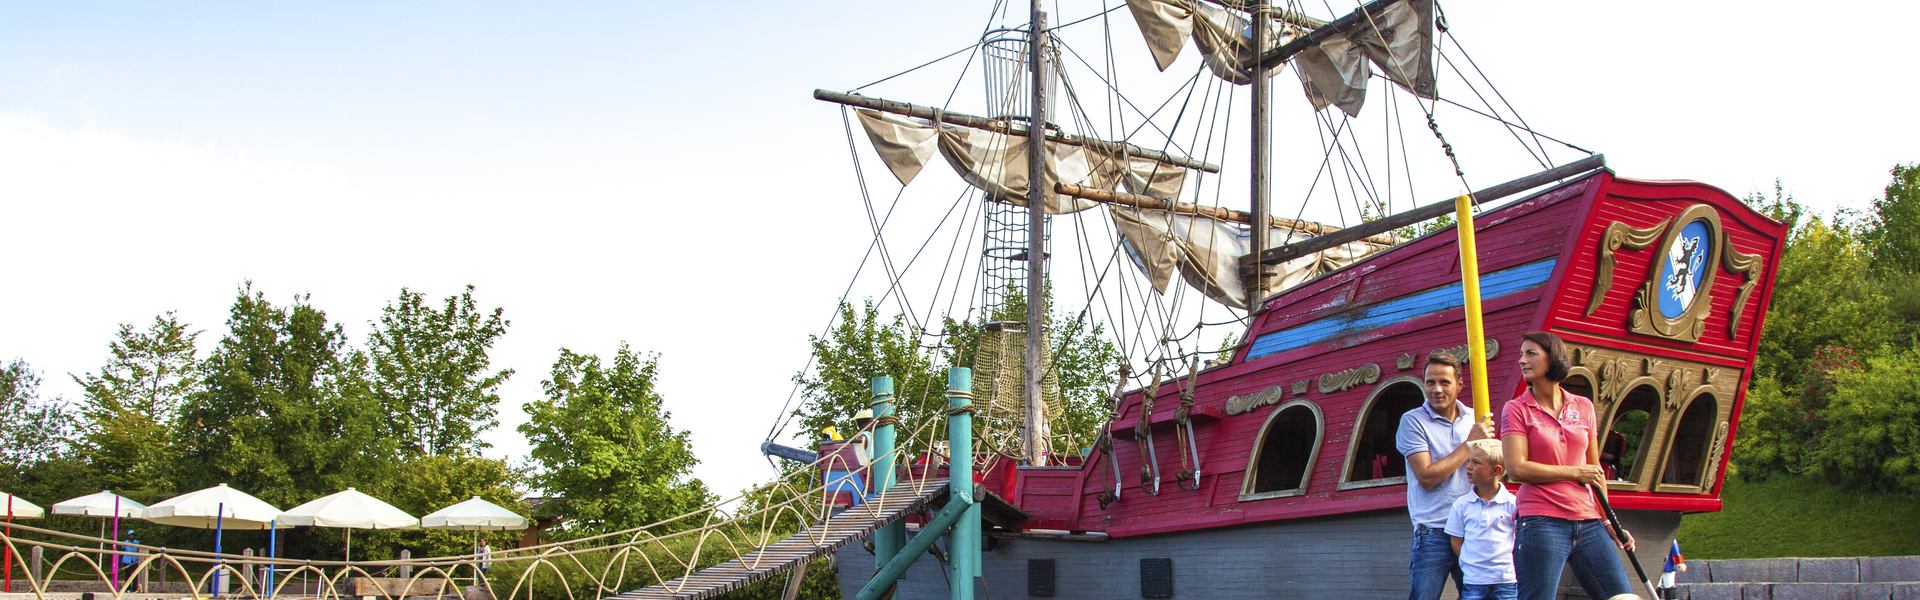 Pirate Ship in the Playmobil FunPark